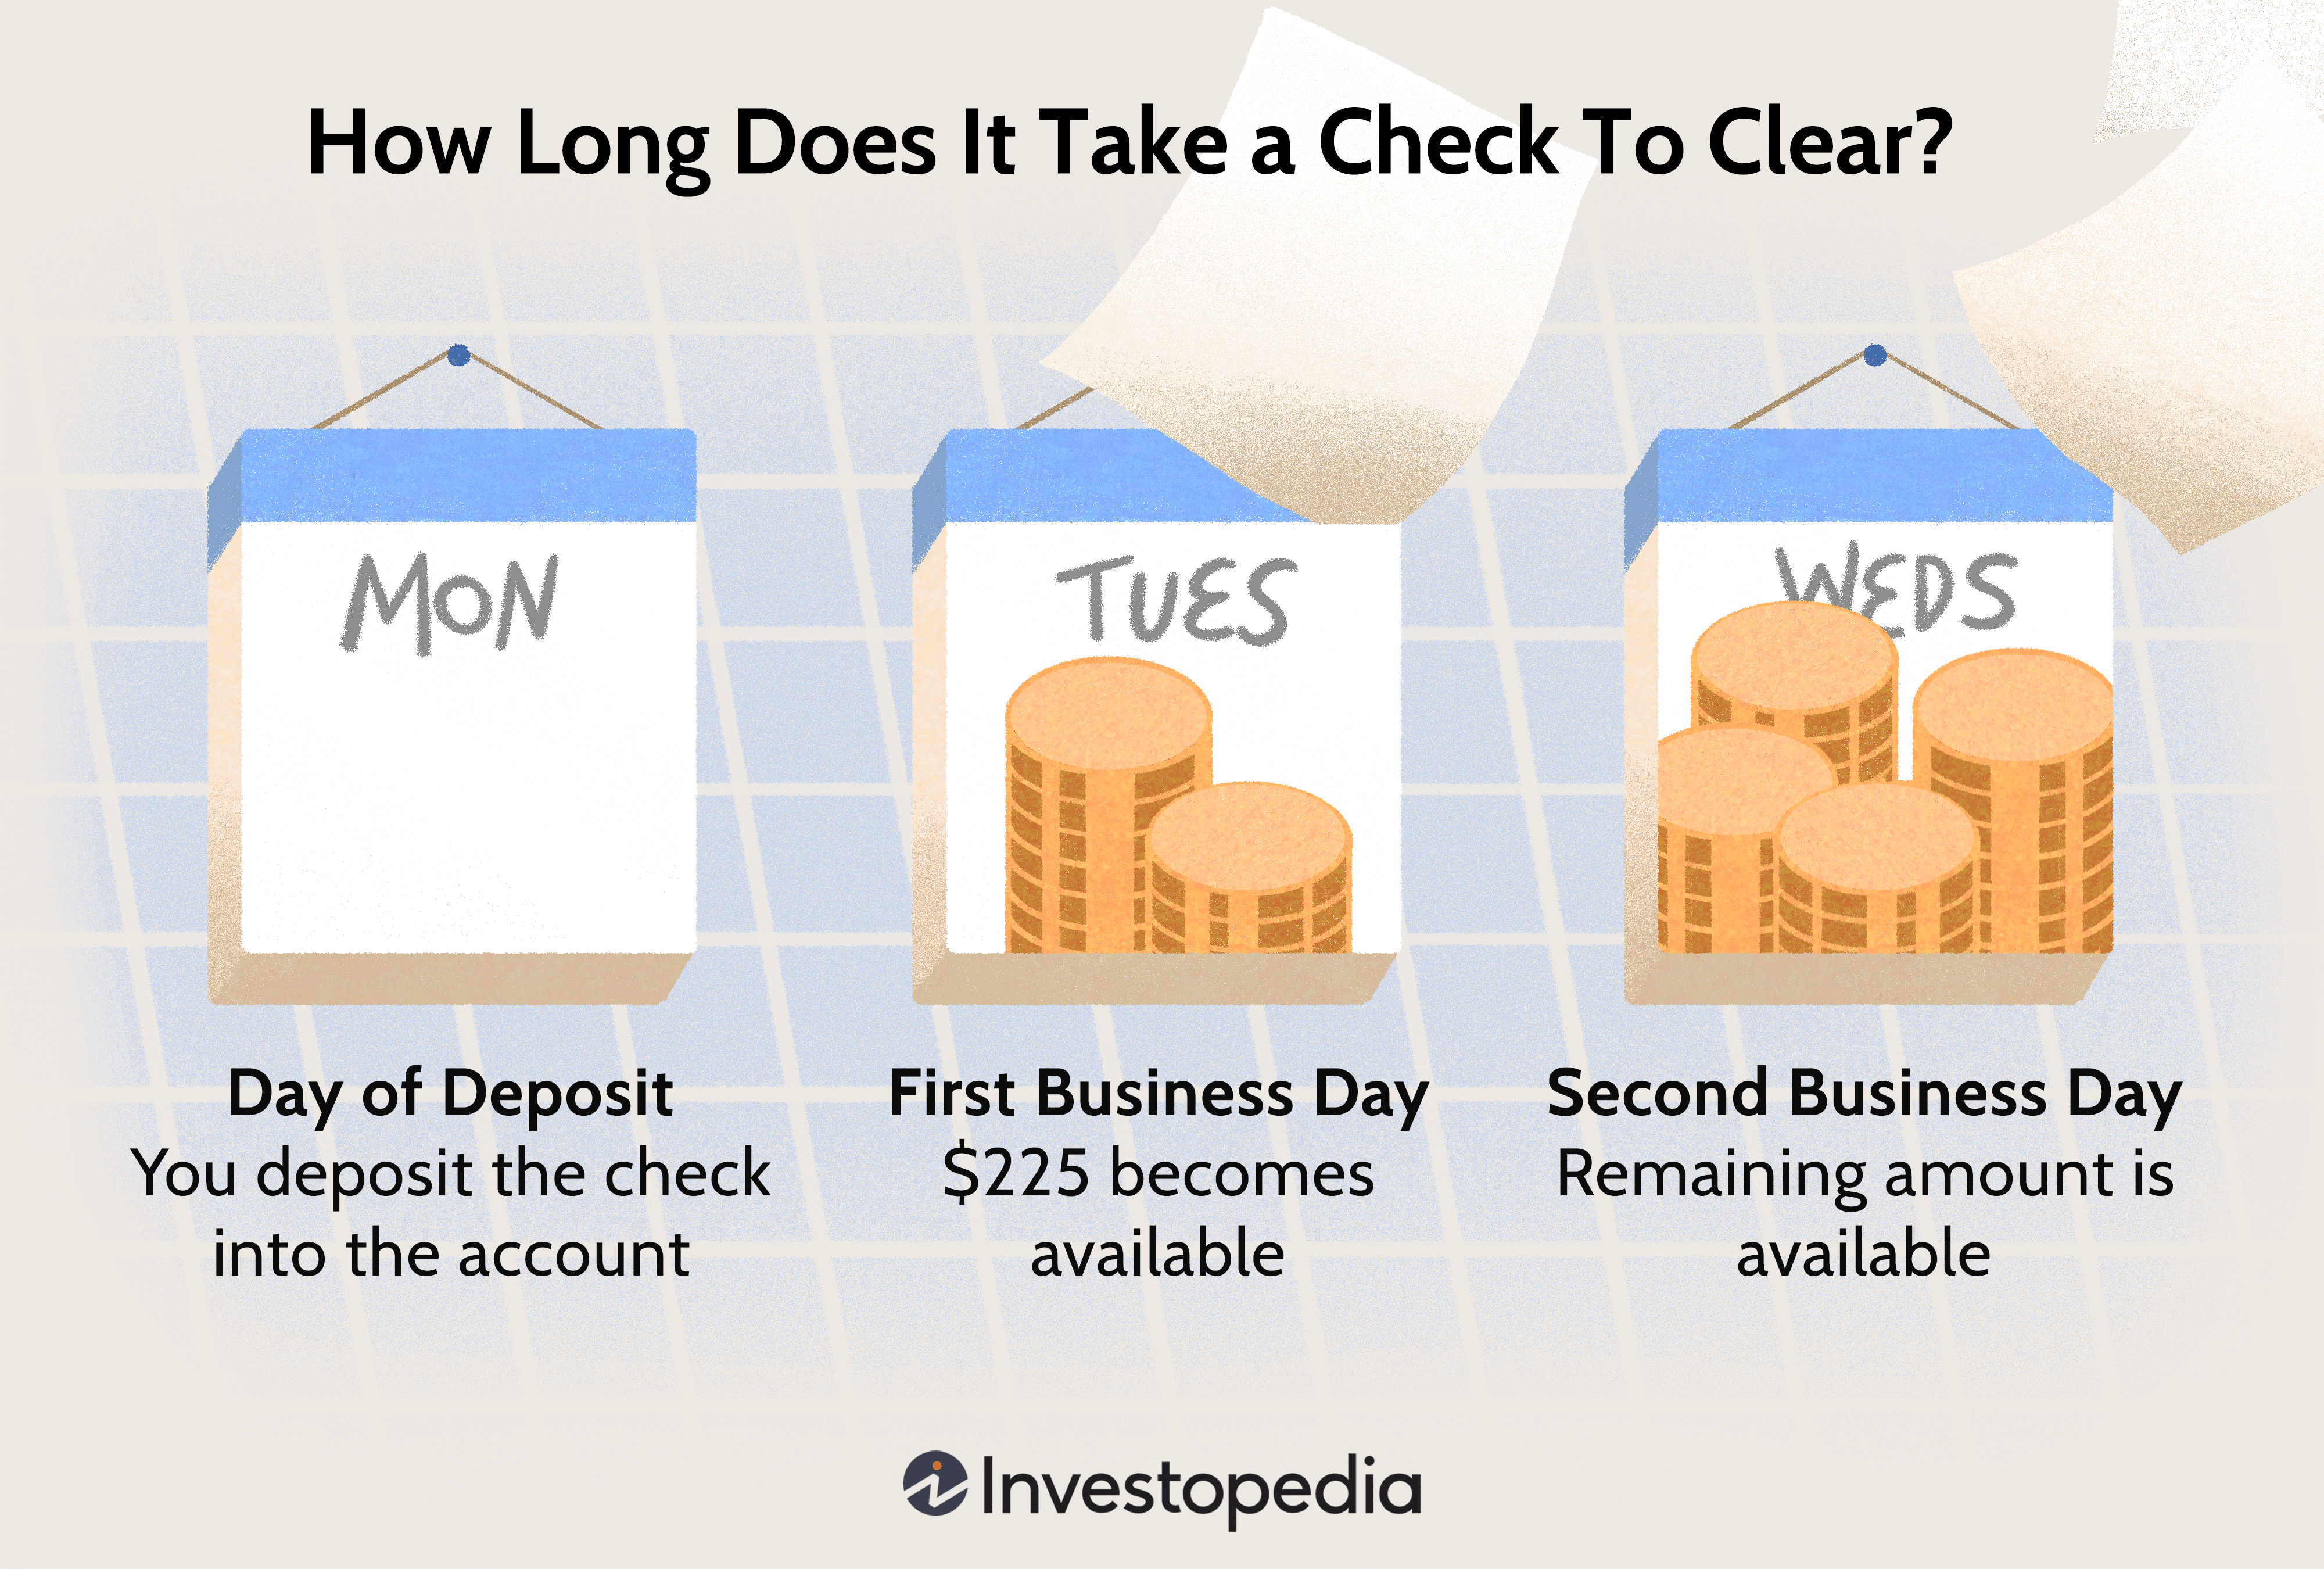 How Long Does It Take a Check To Clear?